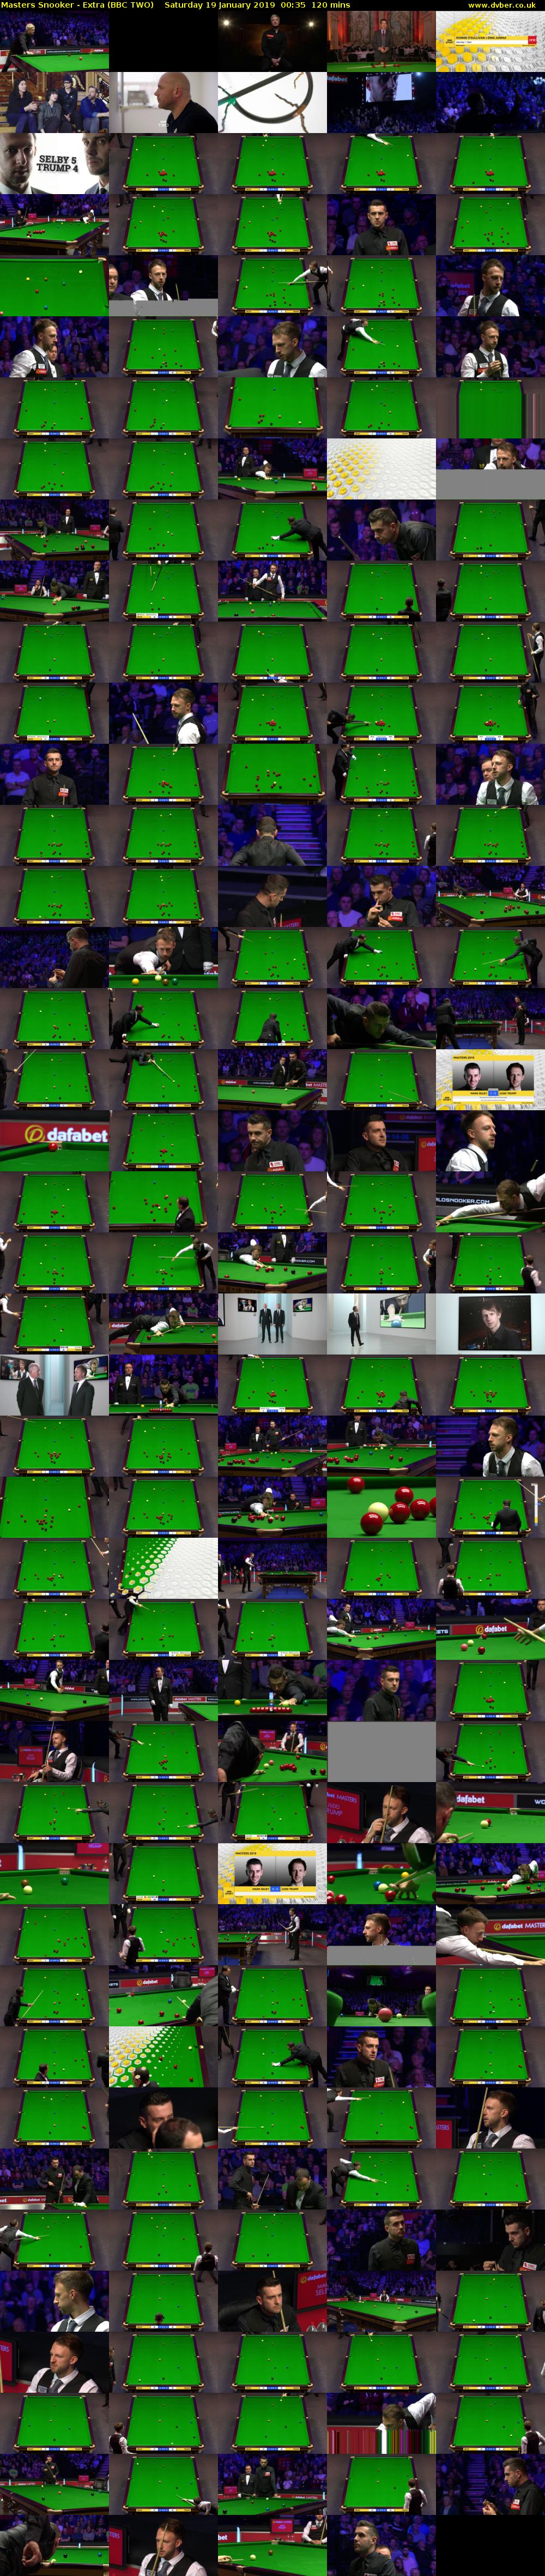 Masters Snooker - Extra (BBC TWO) Saturday 19 January 2019 00:35 - 02:35